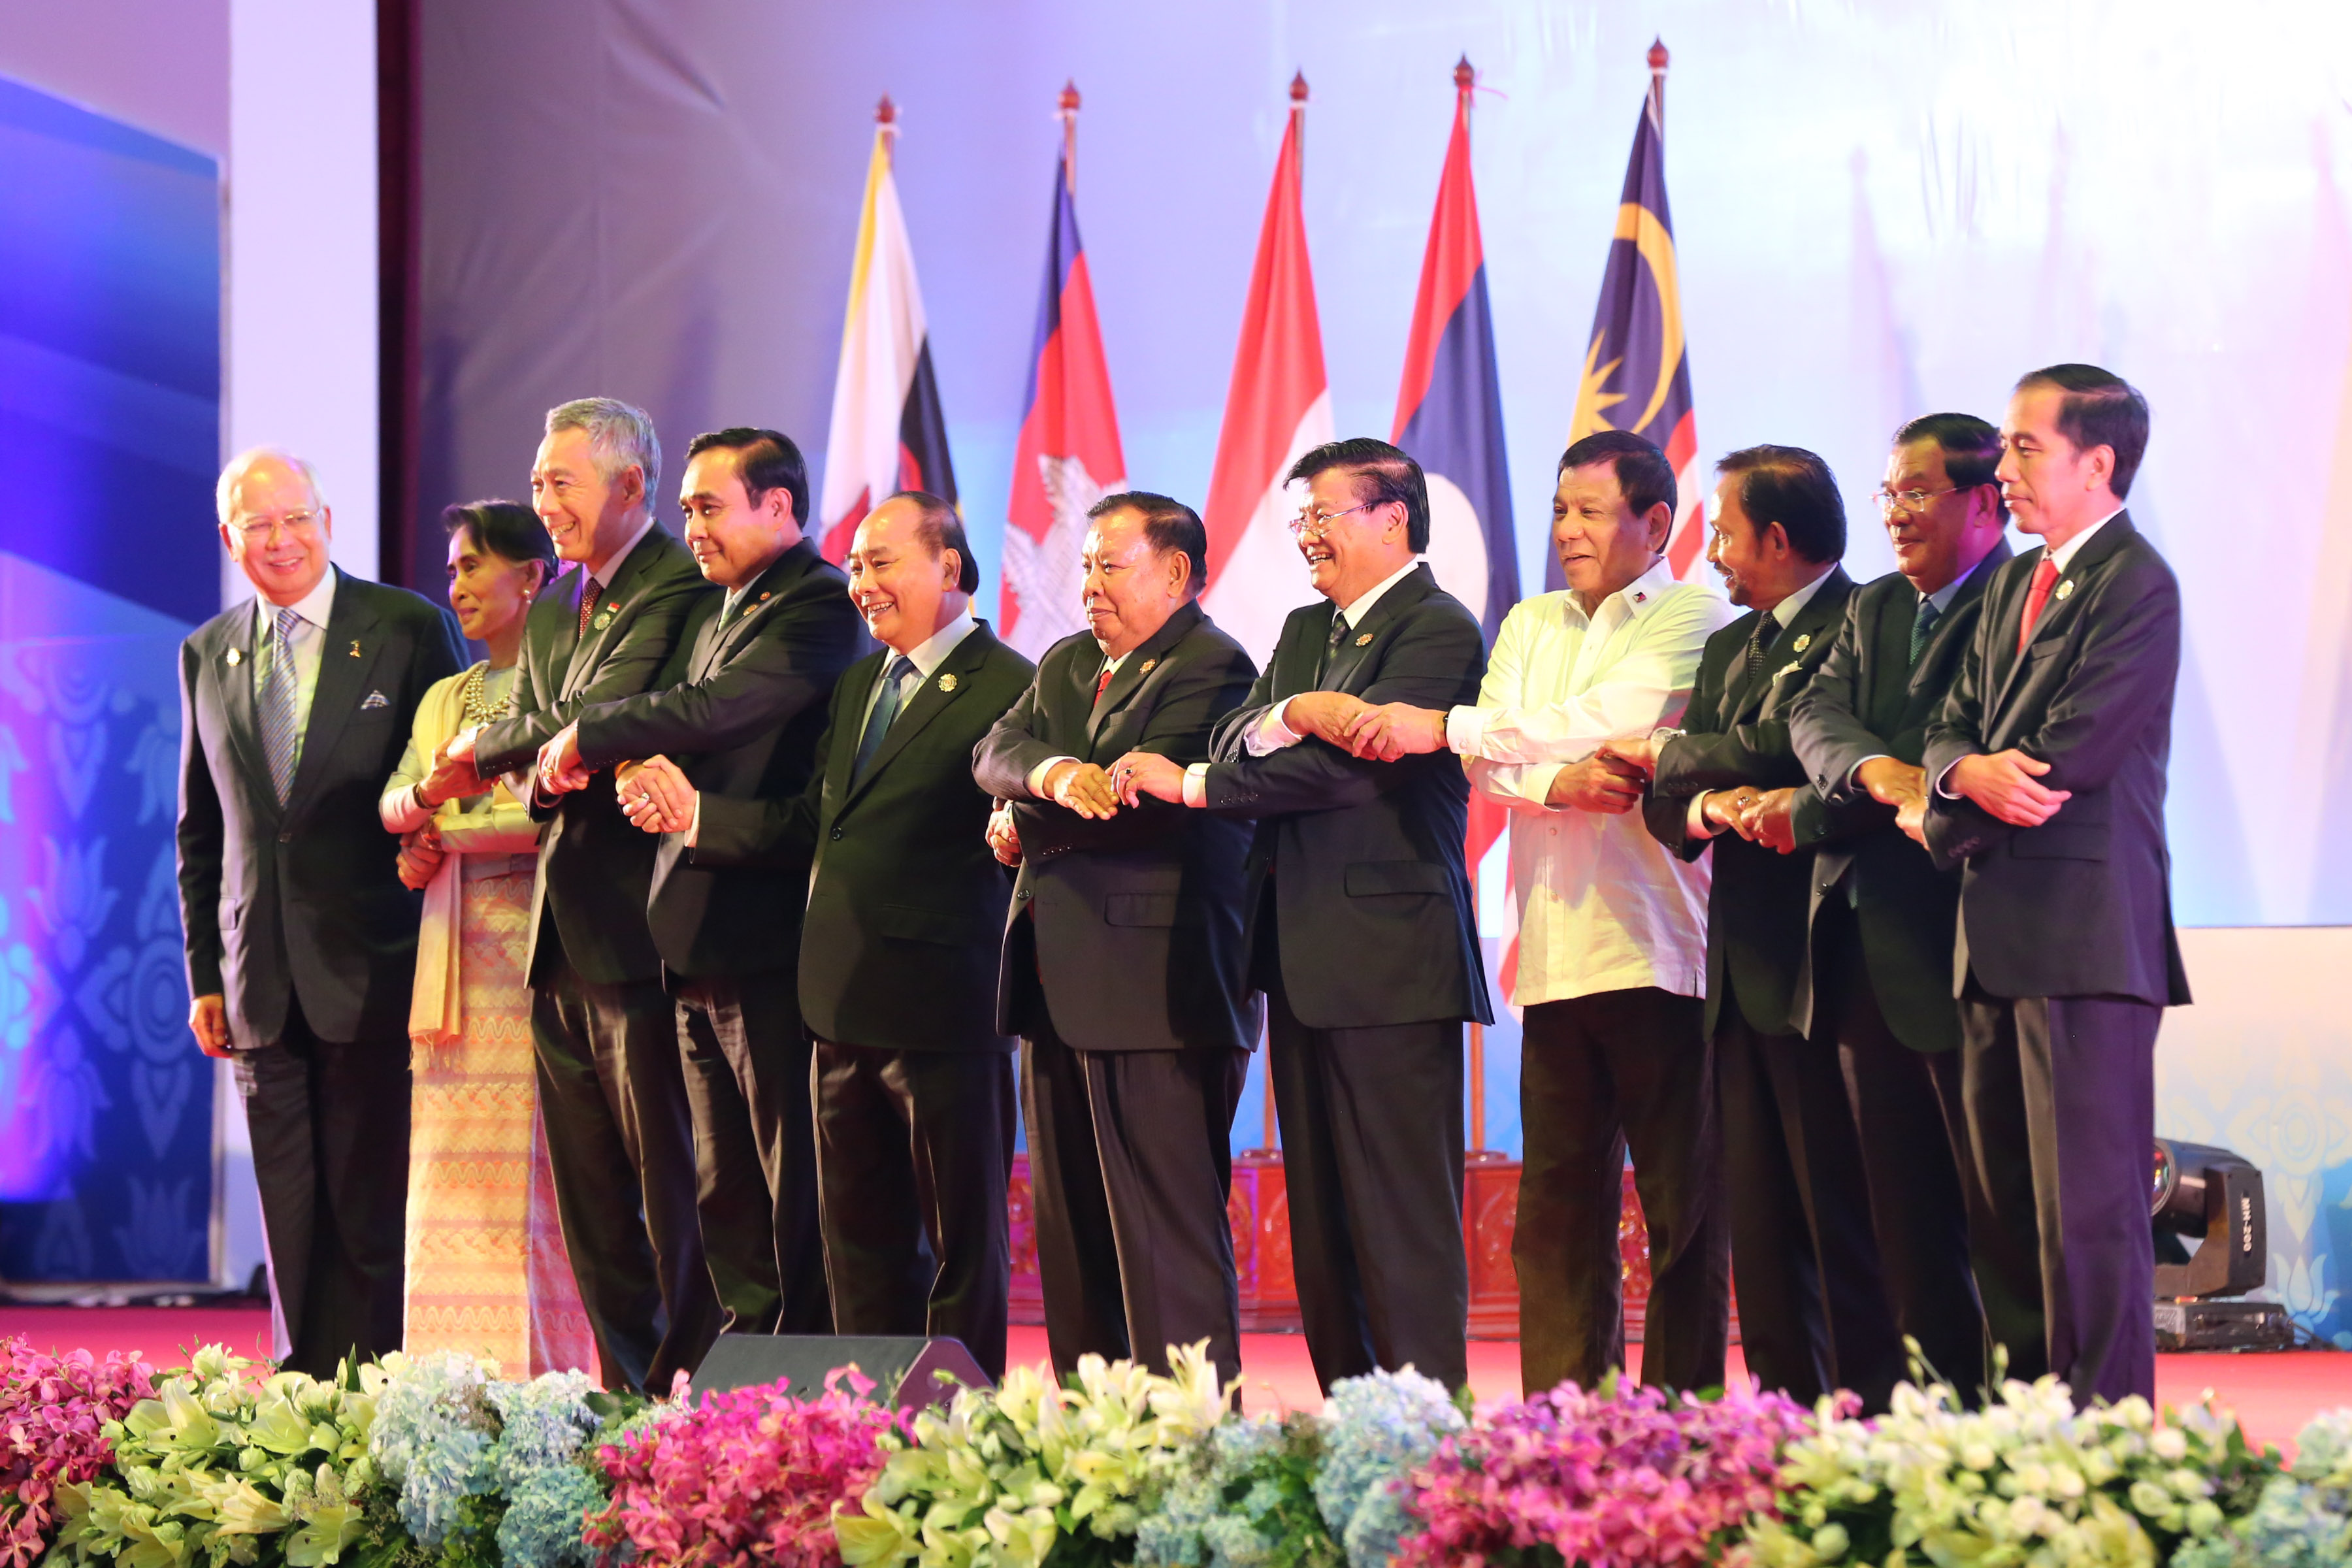 ASEAN'S CHALLENGE. President Rodrigo Duterte accepts the chairmanship of the ASEAN in 2017 during the 2016 ASEAN Summit held in Laos. Photo from PPD  